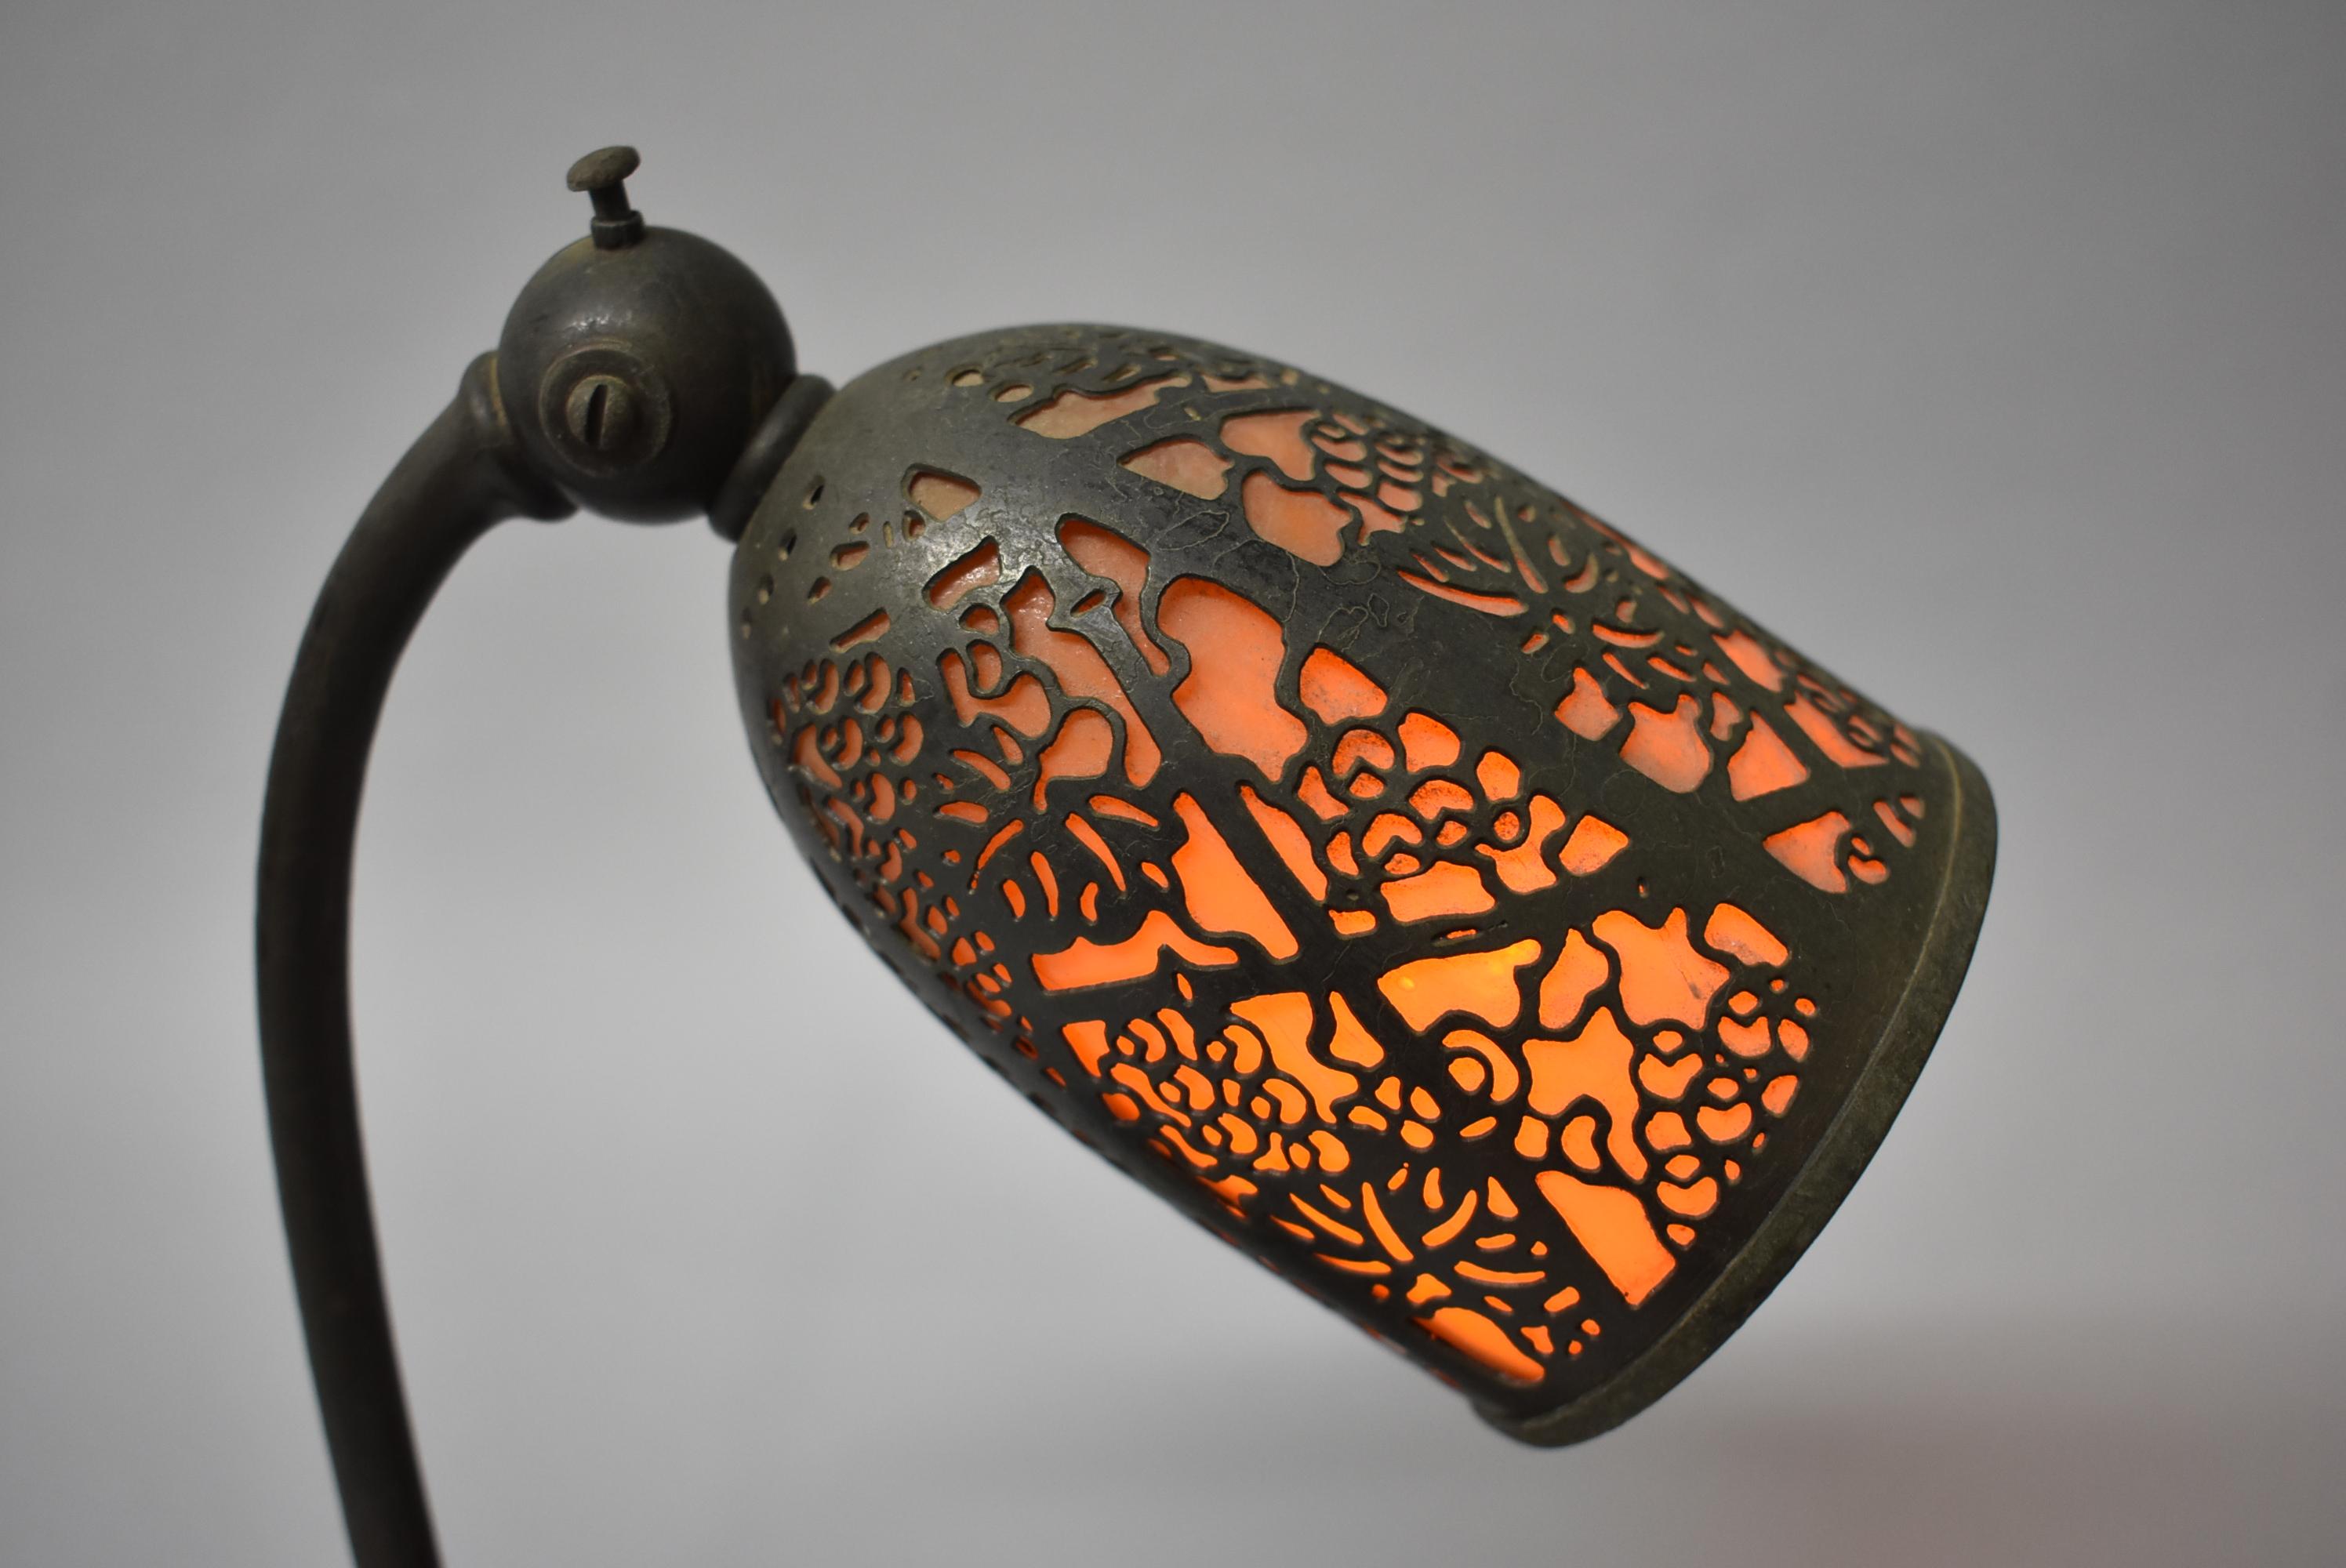 Antique Tiffany Studios bronze desk lamp with amber slag glass shade covered in filigree grapevine pattern. Single socket. Marked on the bottom #552. Shade adjusts.